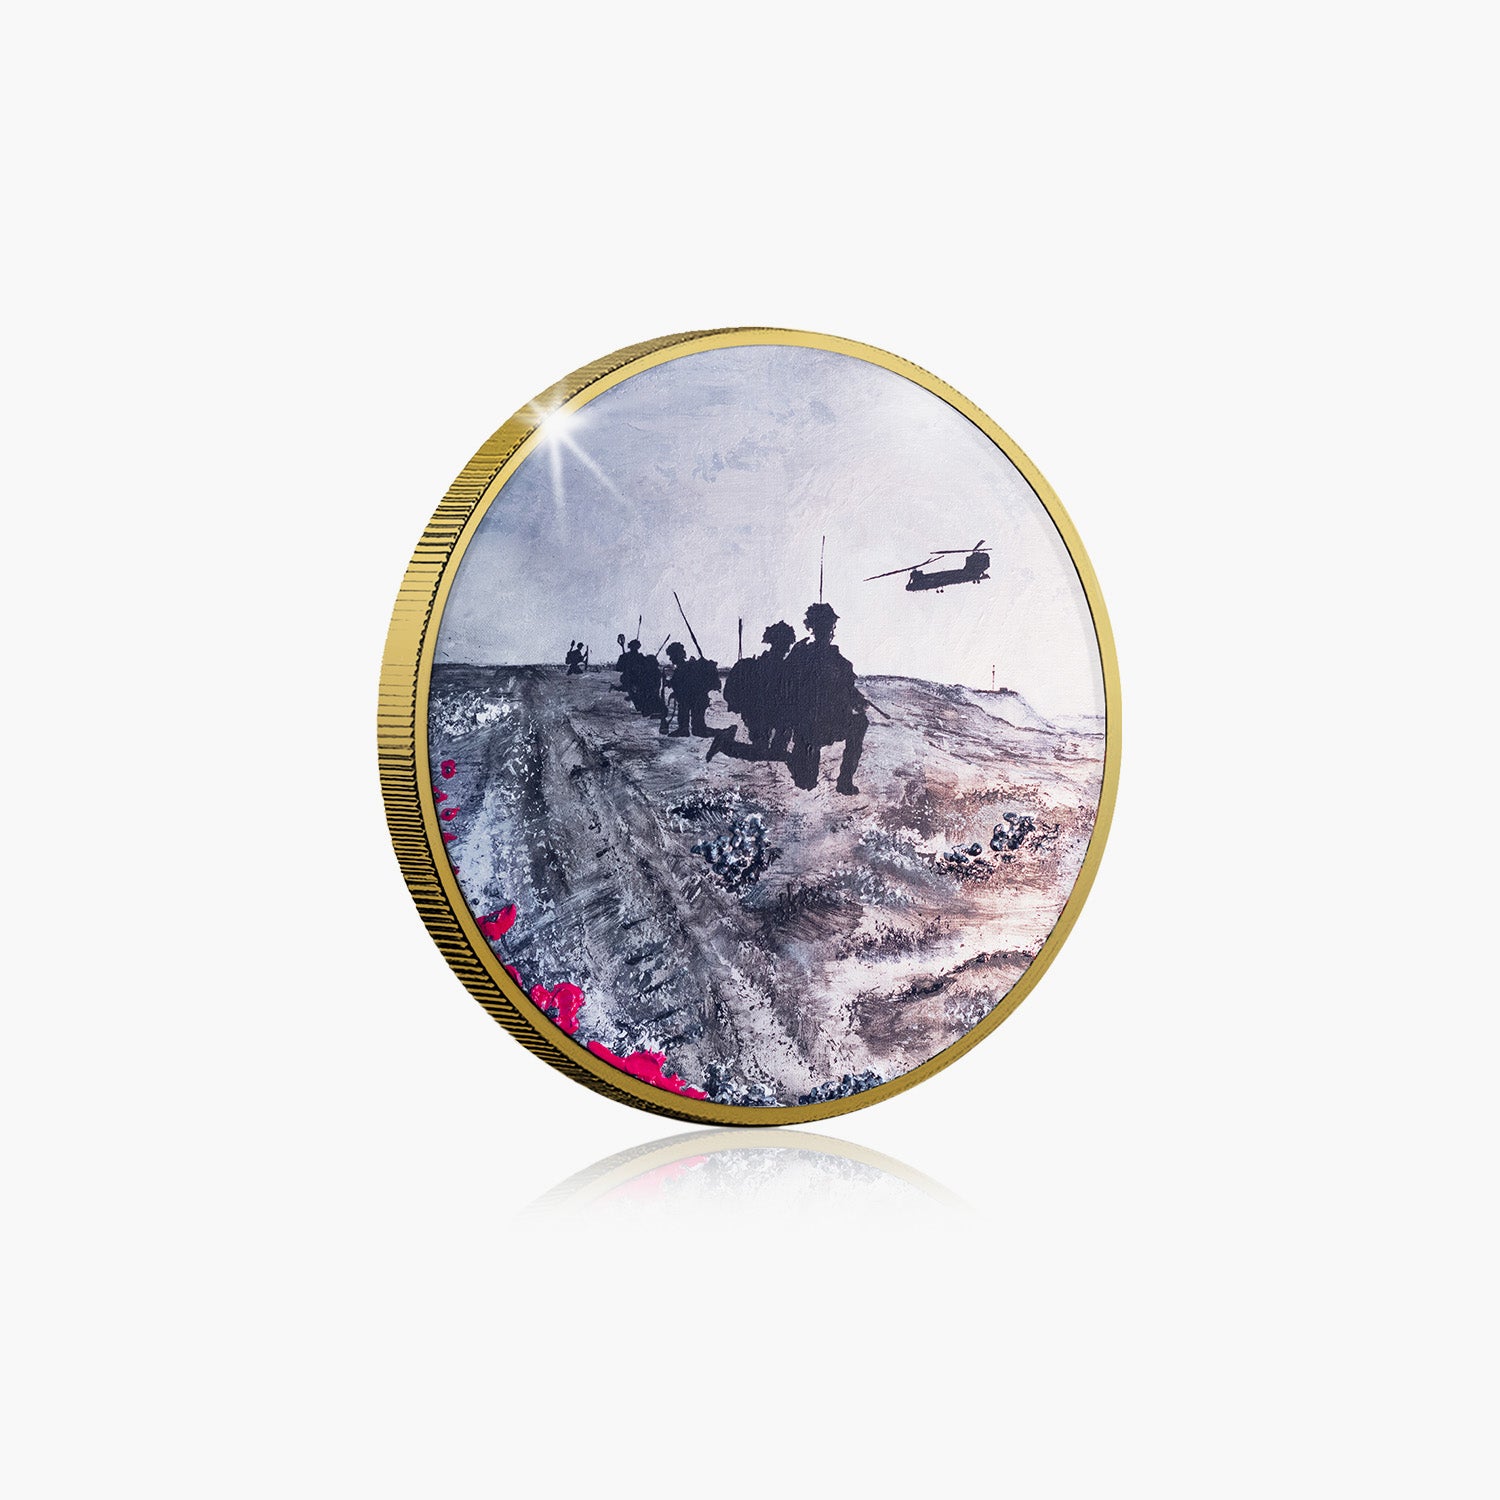 Medic On The Mountain Gold-Plated Commemorative